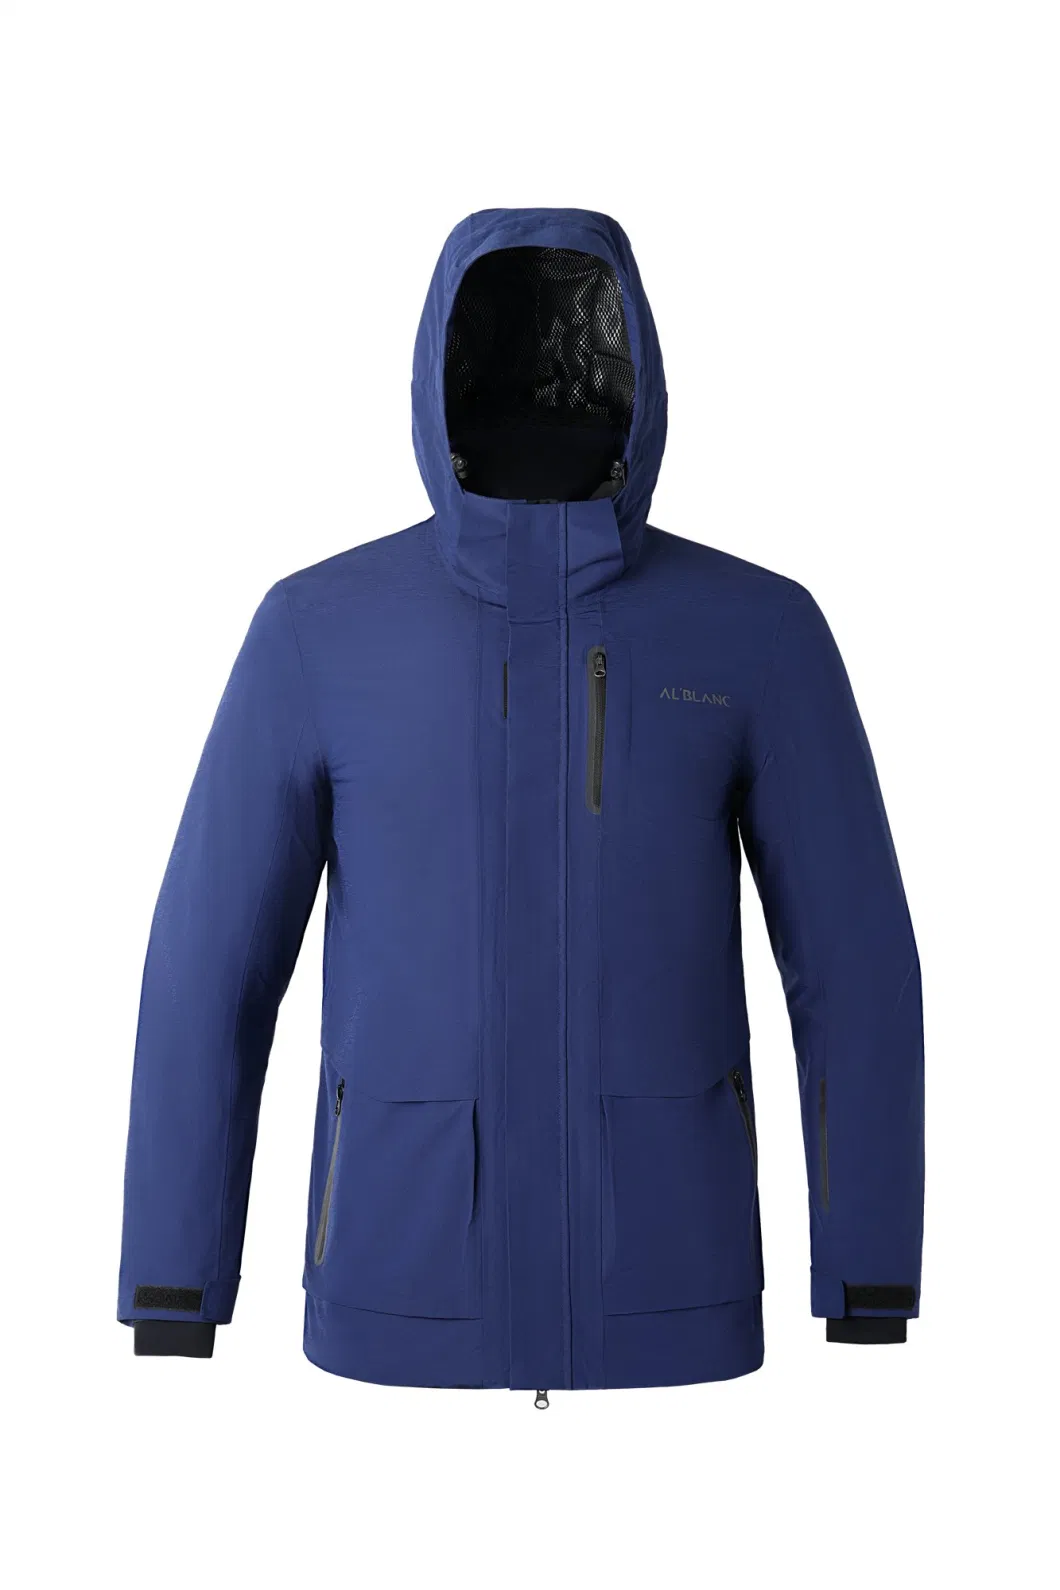 Manufacture Custom Outdoor Clothing Winter Warm Men Fashion Apparel Ski Padding Jacket with Detached Hood